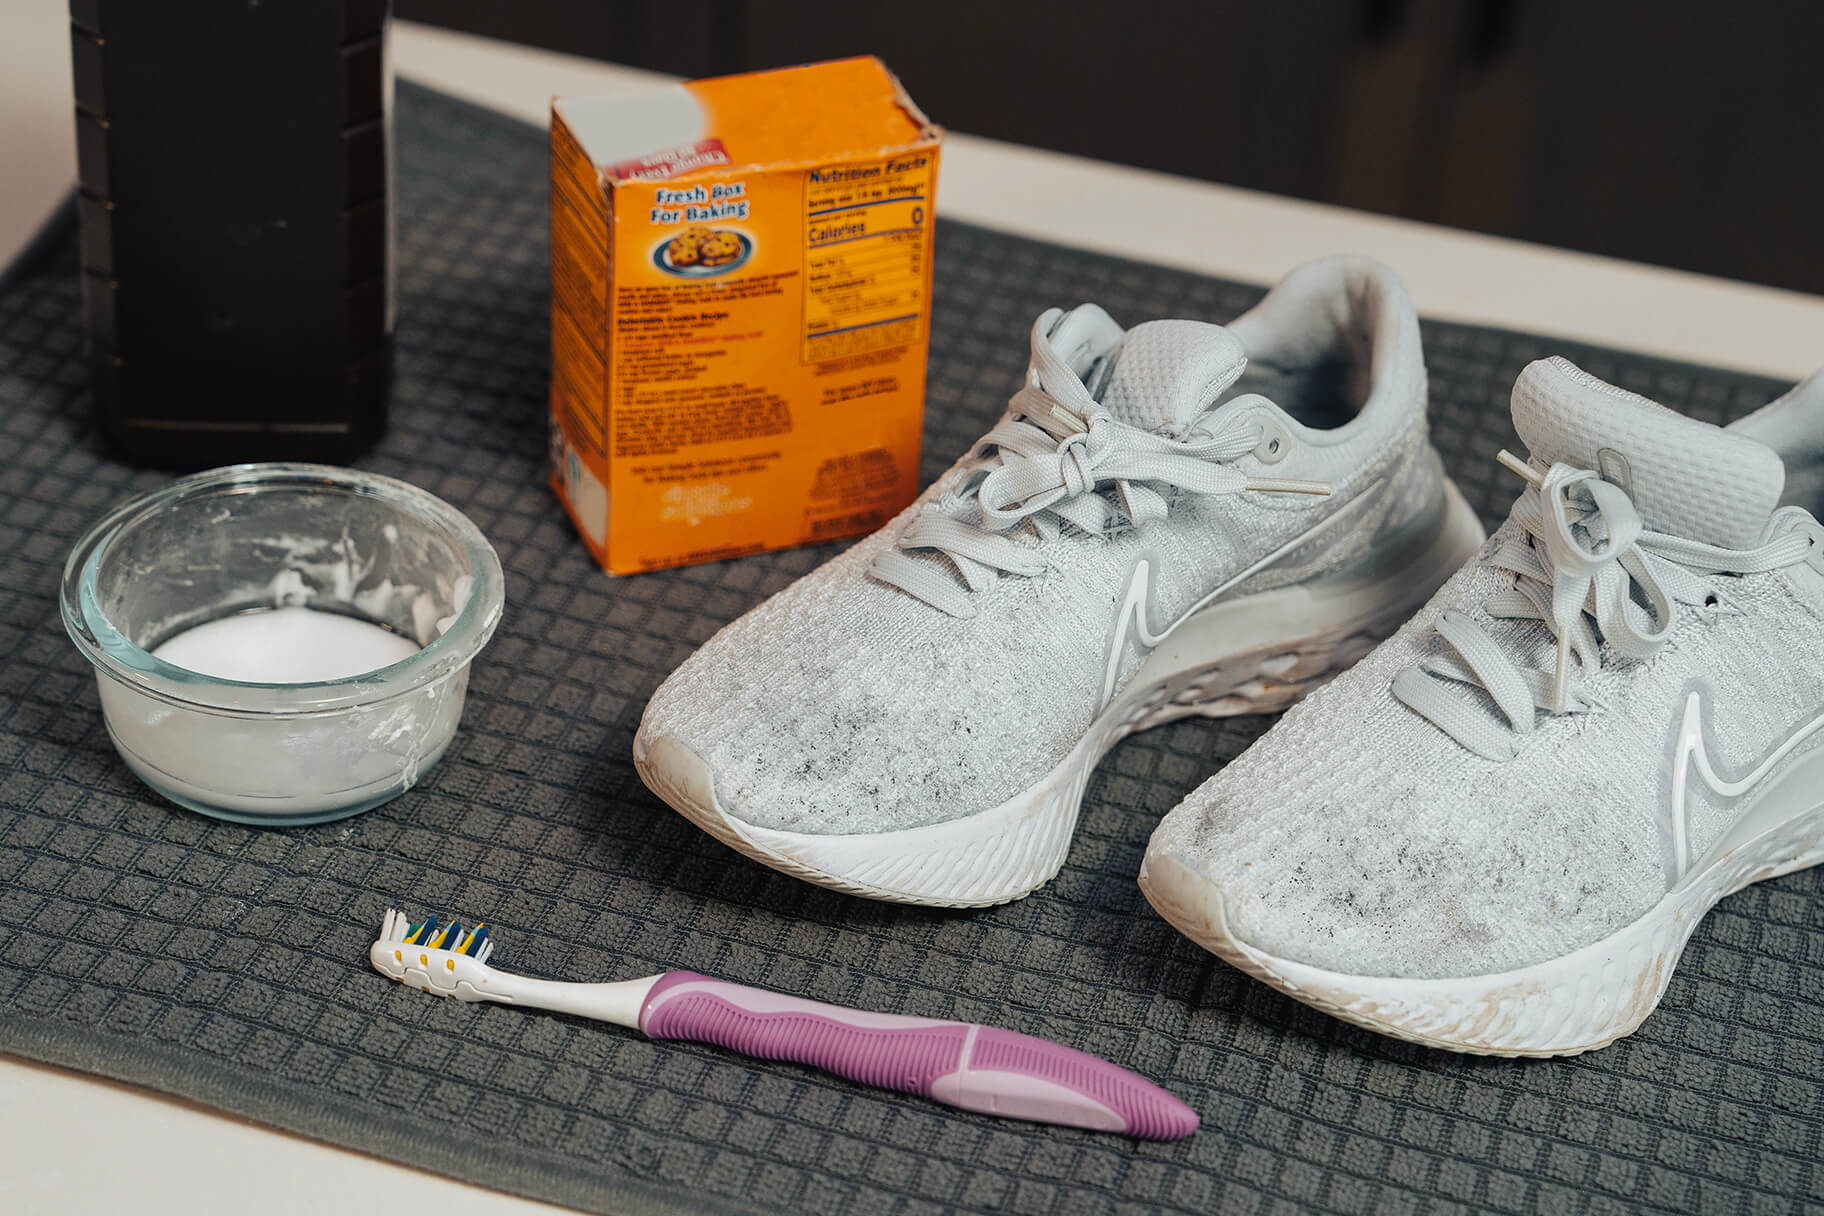 How to Clean Mesh Shoes